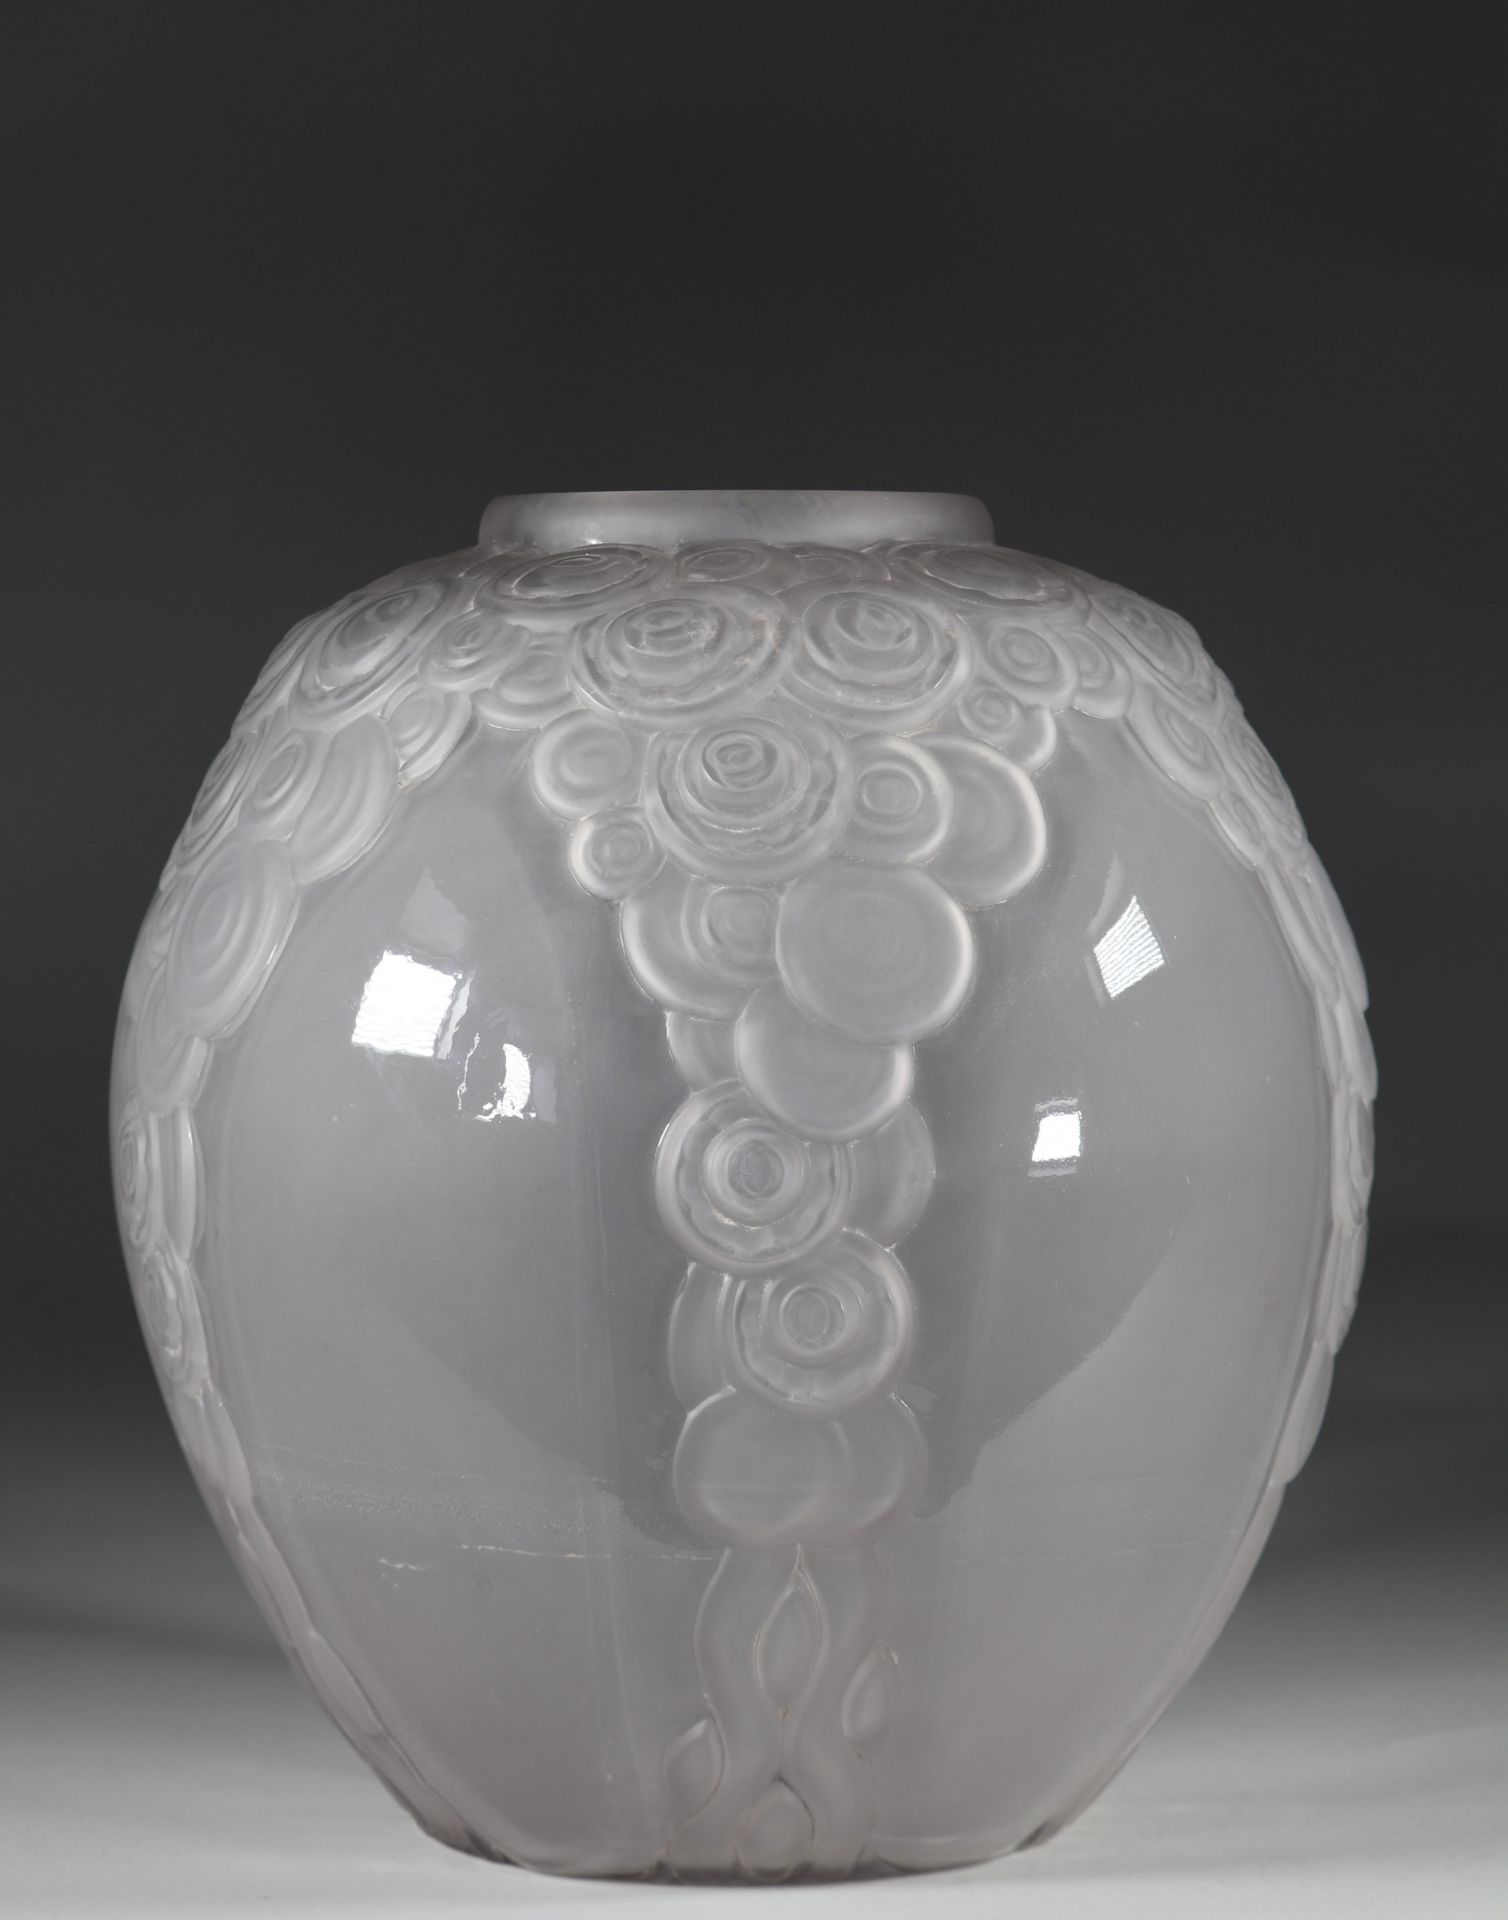 Andre HUNEBELLE imposing ovoid glass vase with a garland of falling stylized flowers